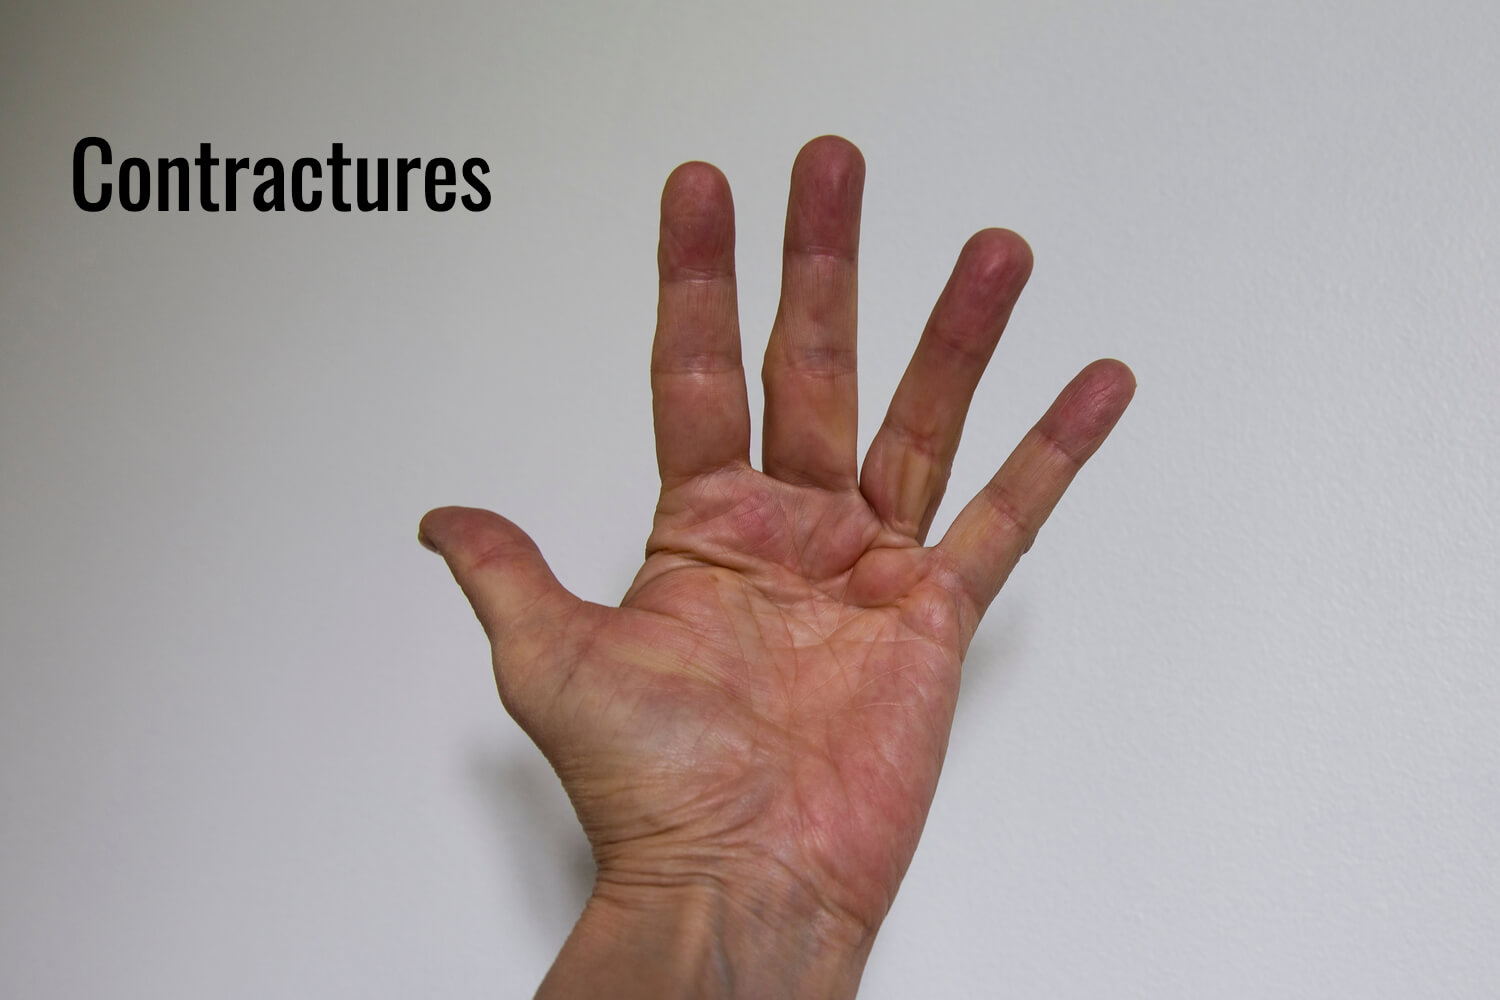 Contractures